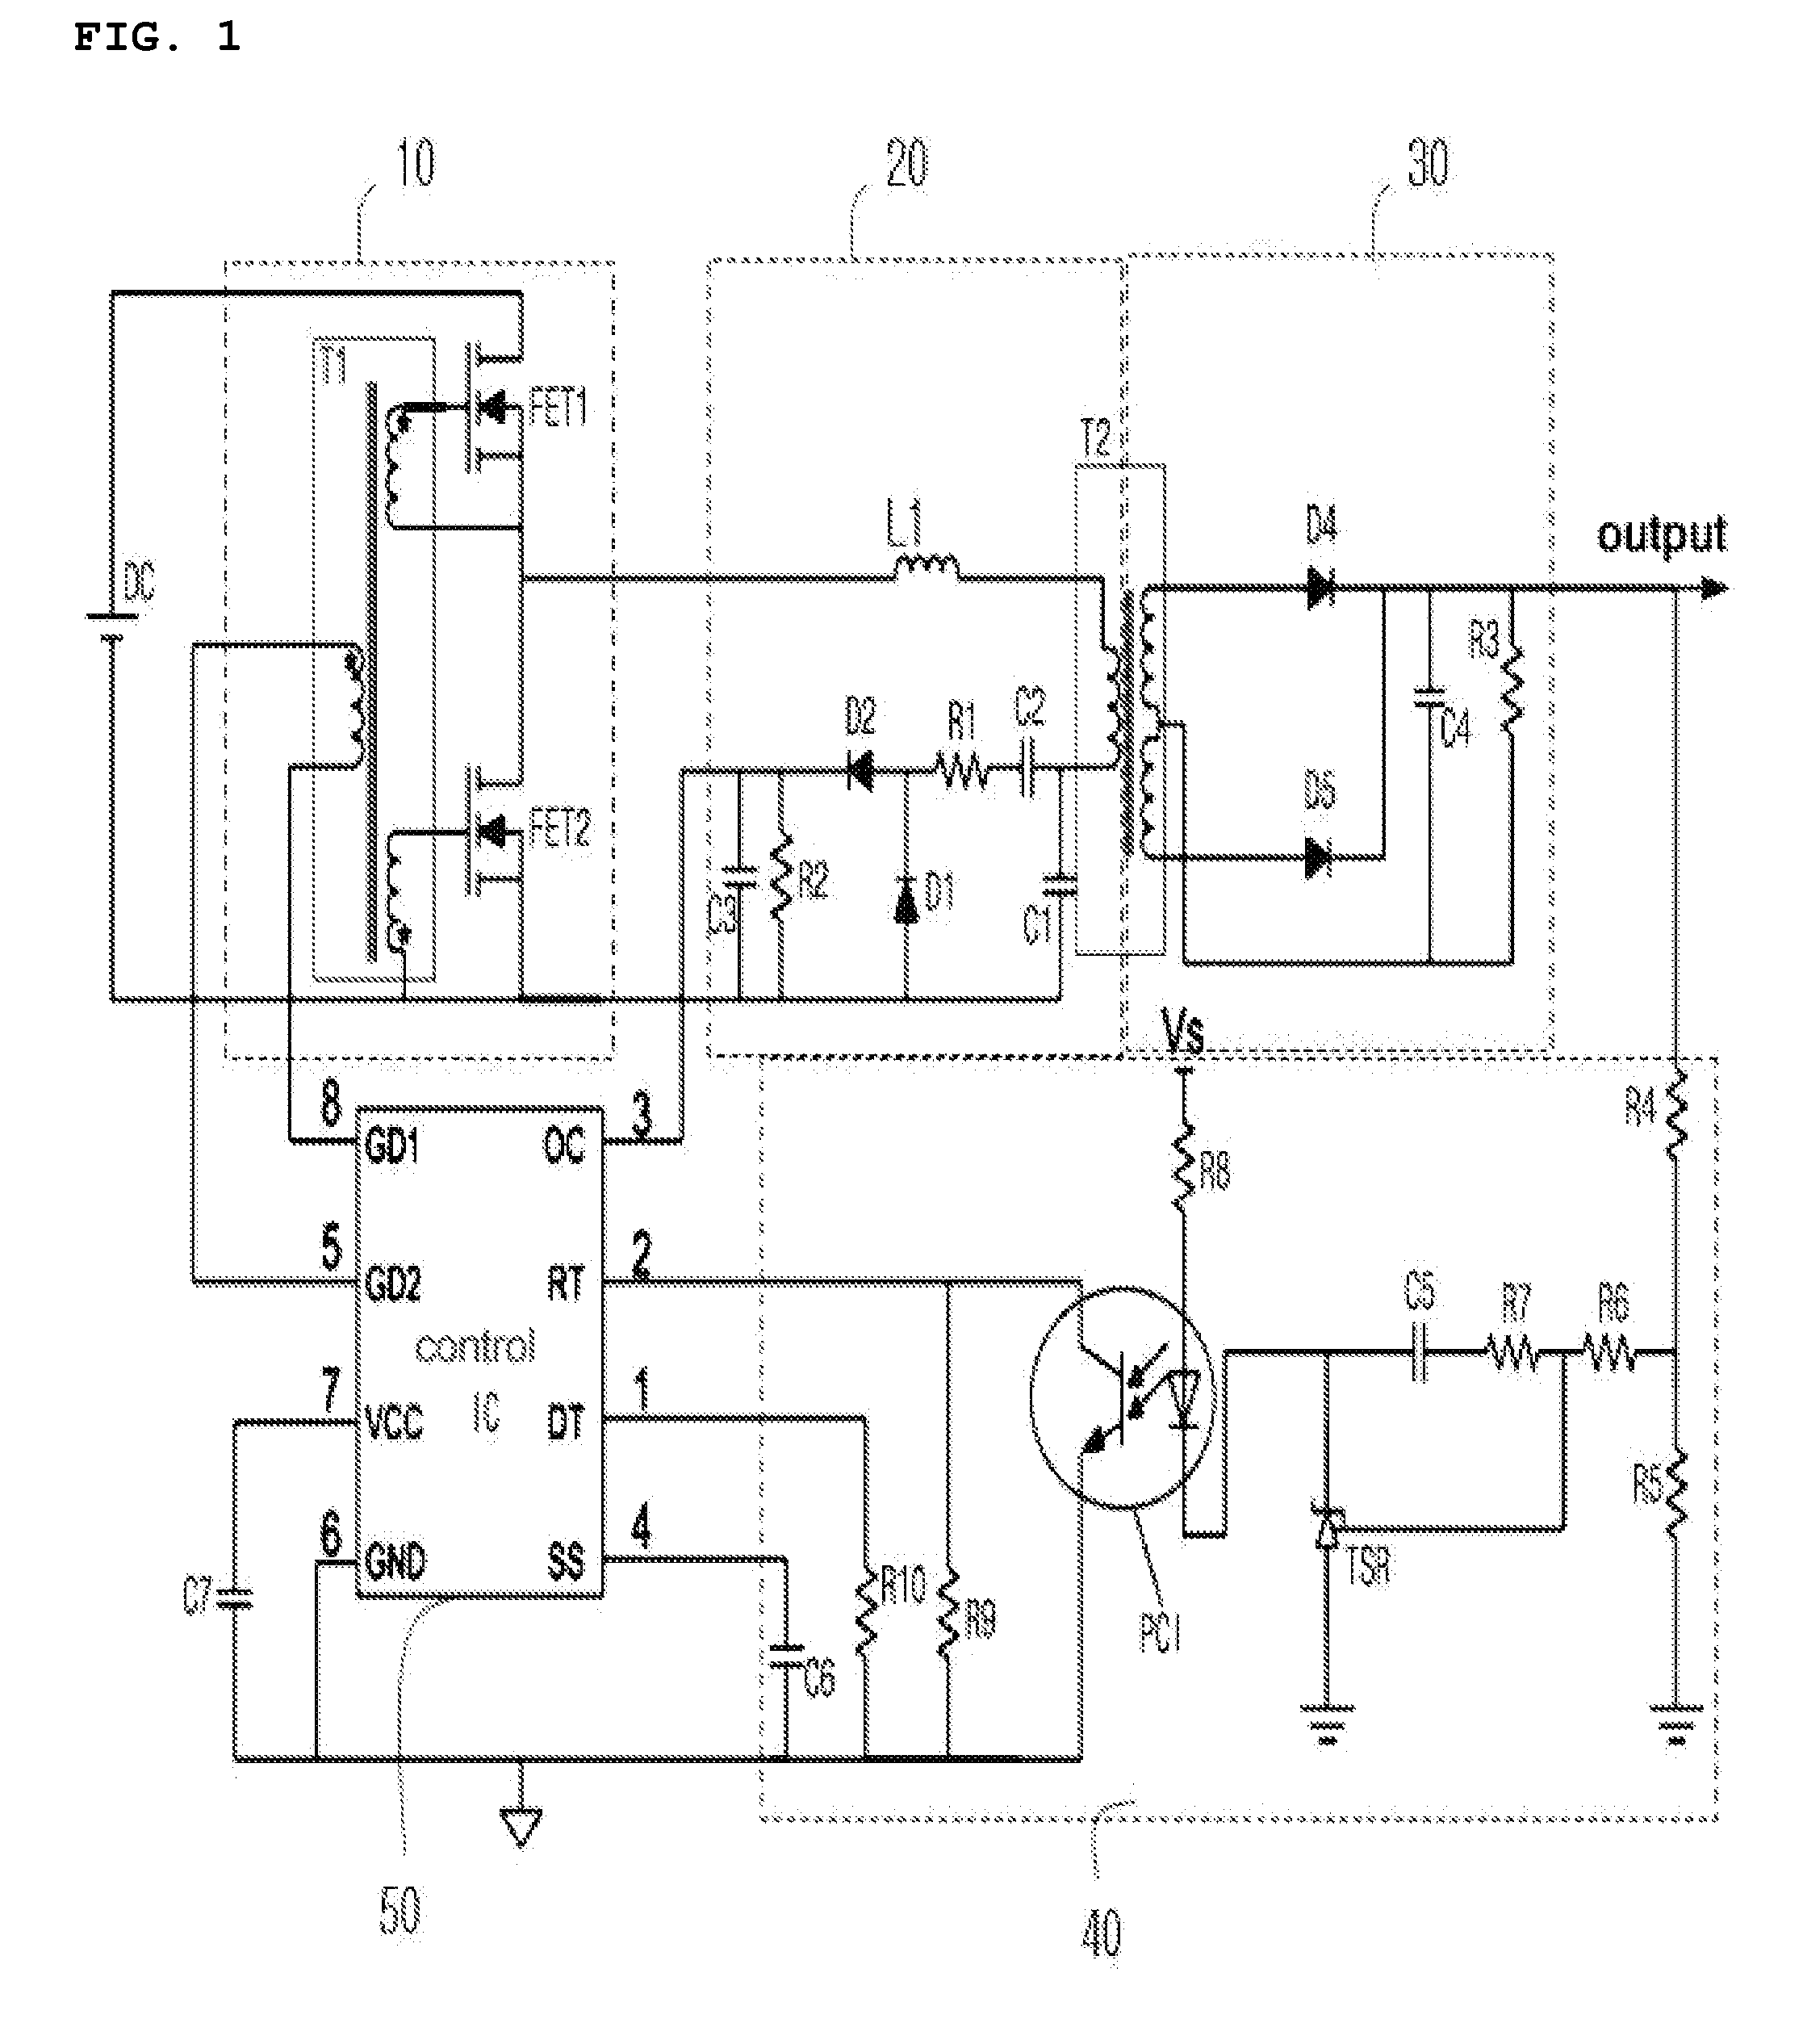 Half-bridge power converter for driving LED by series-resonant connection of inductor, inductor and capacitor